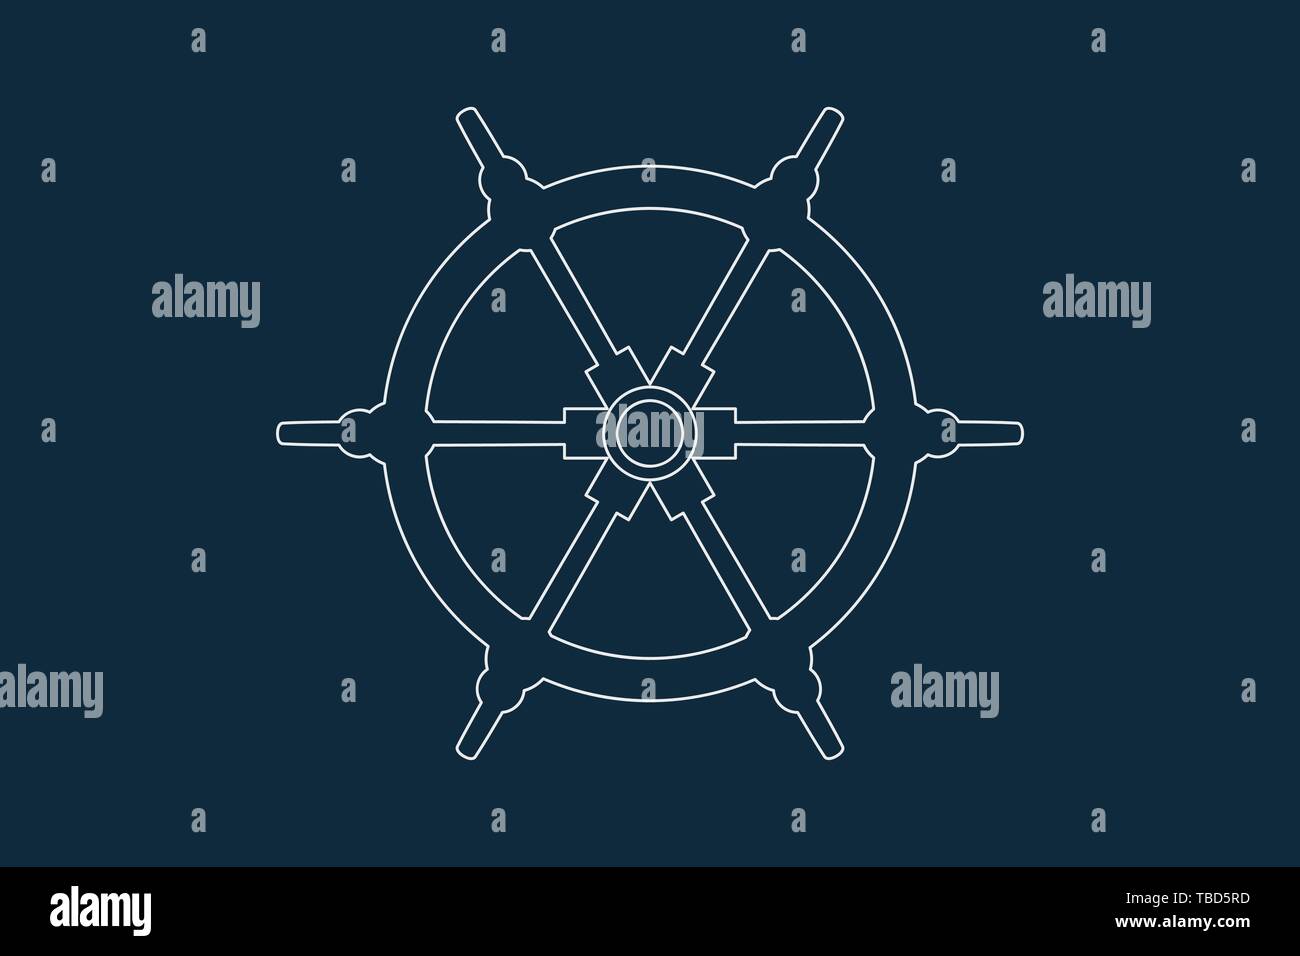 Line drawing vector of a ship or boat wheel on blue Stock Vector